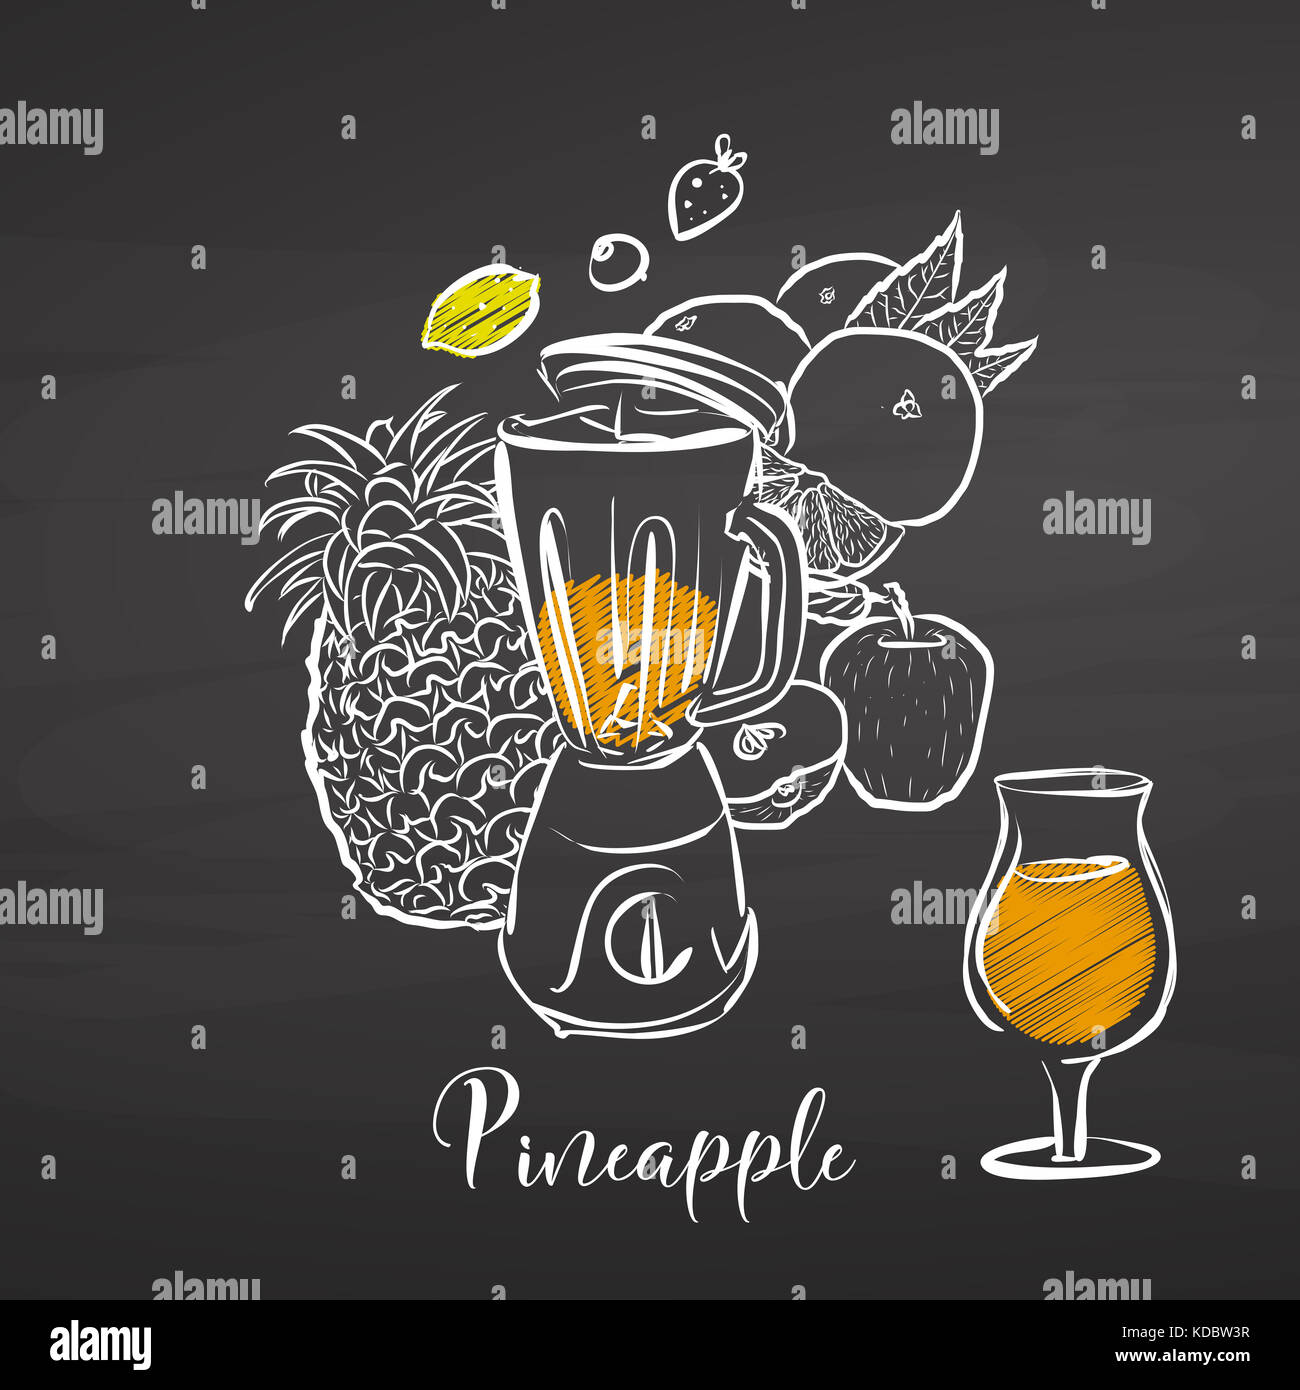 Pineapple smoothie scene on chalkboard. Hand drawn healthy food sketch. Black and White Vector Drawing on Blackboard. Stock Photo